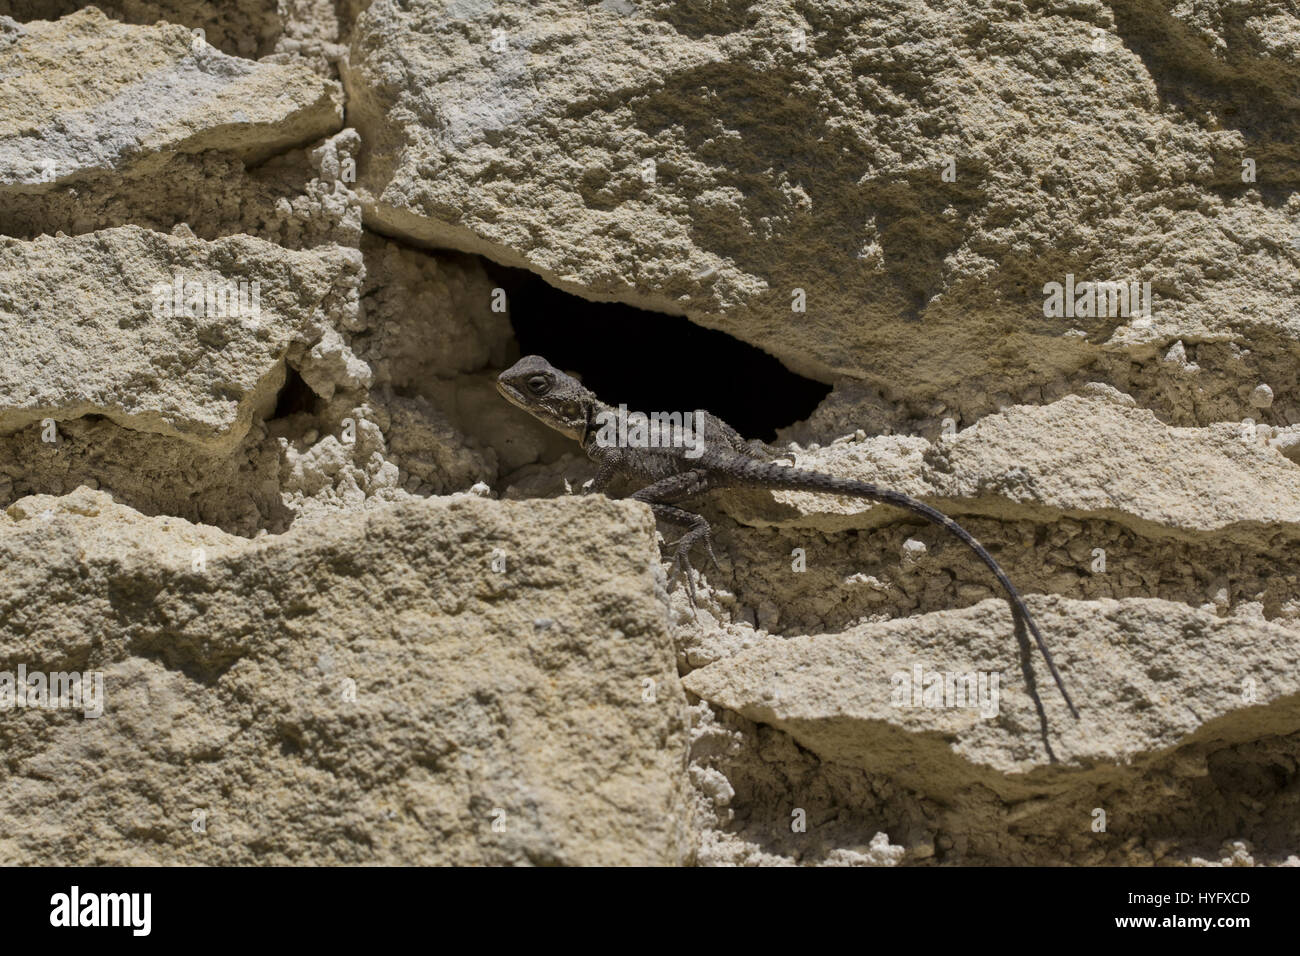 A young Star Agama lizard basking on a stone wall in Cyprus. Stock Photo